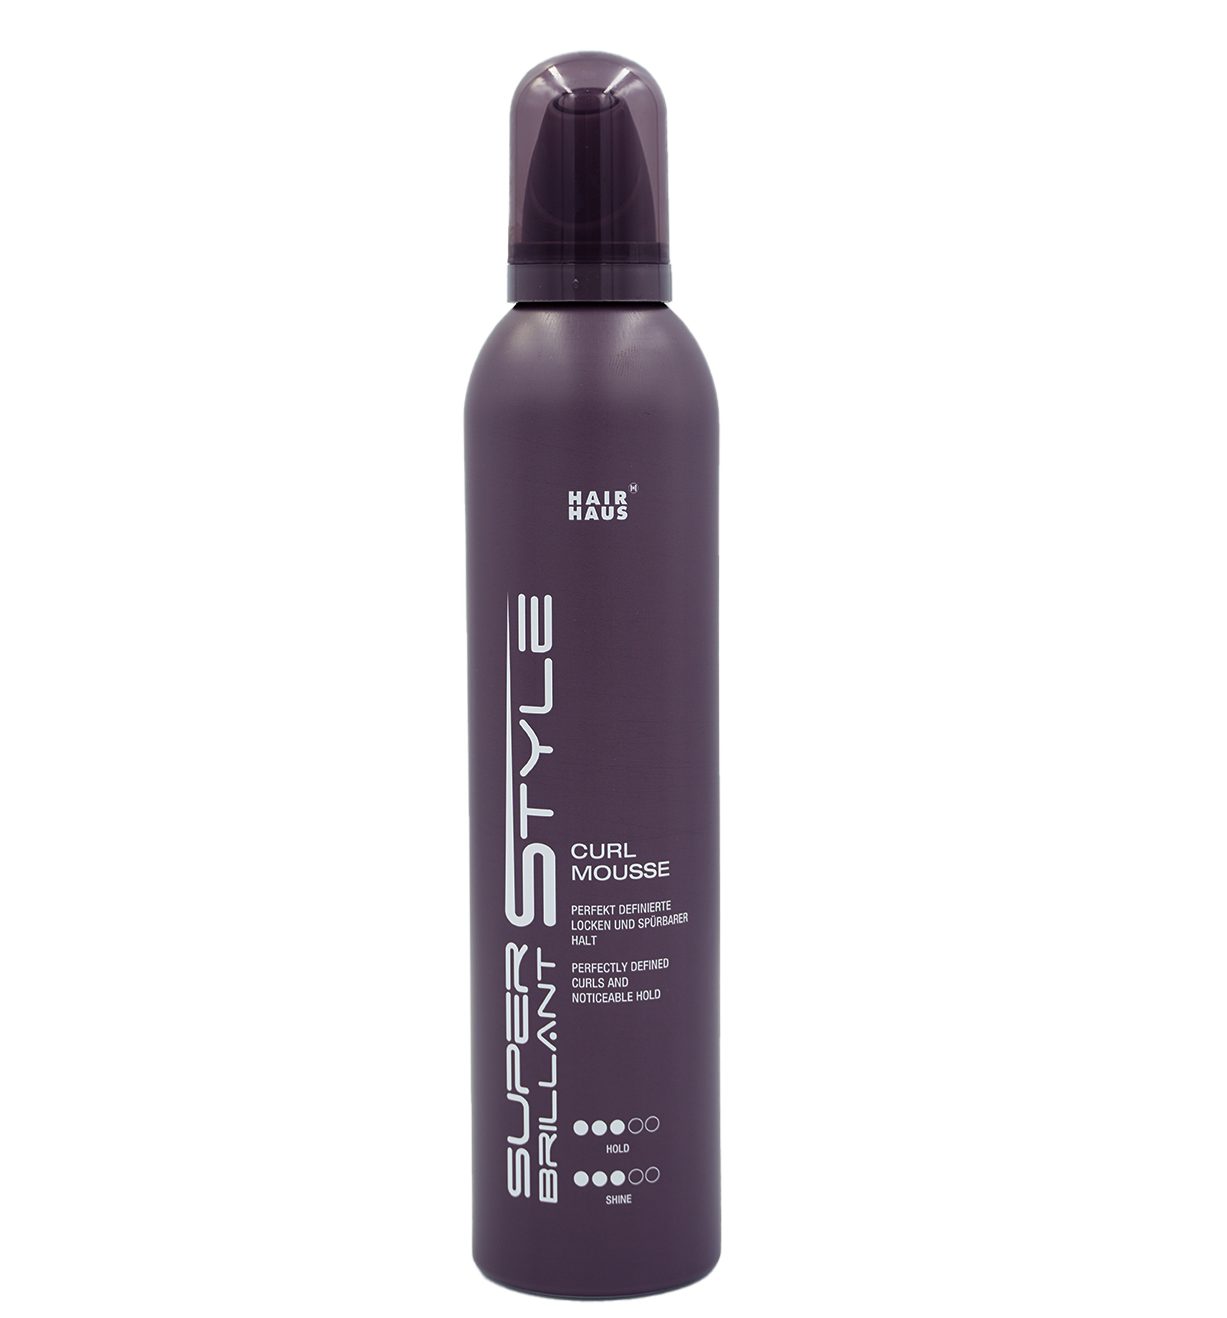 Mousse Curl sbs SB 300ml Haarmousse Style